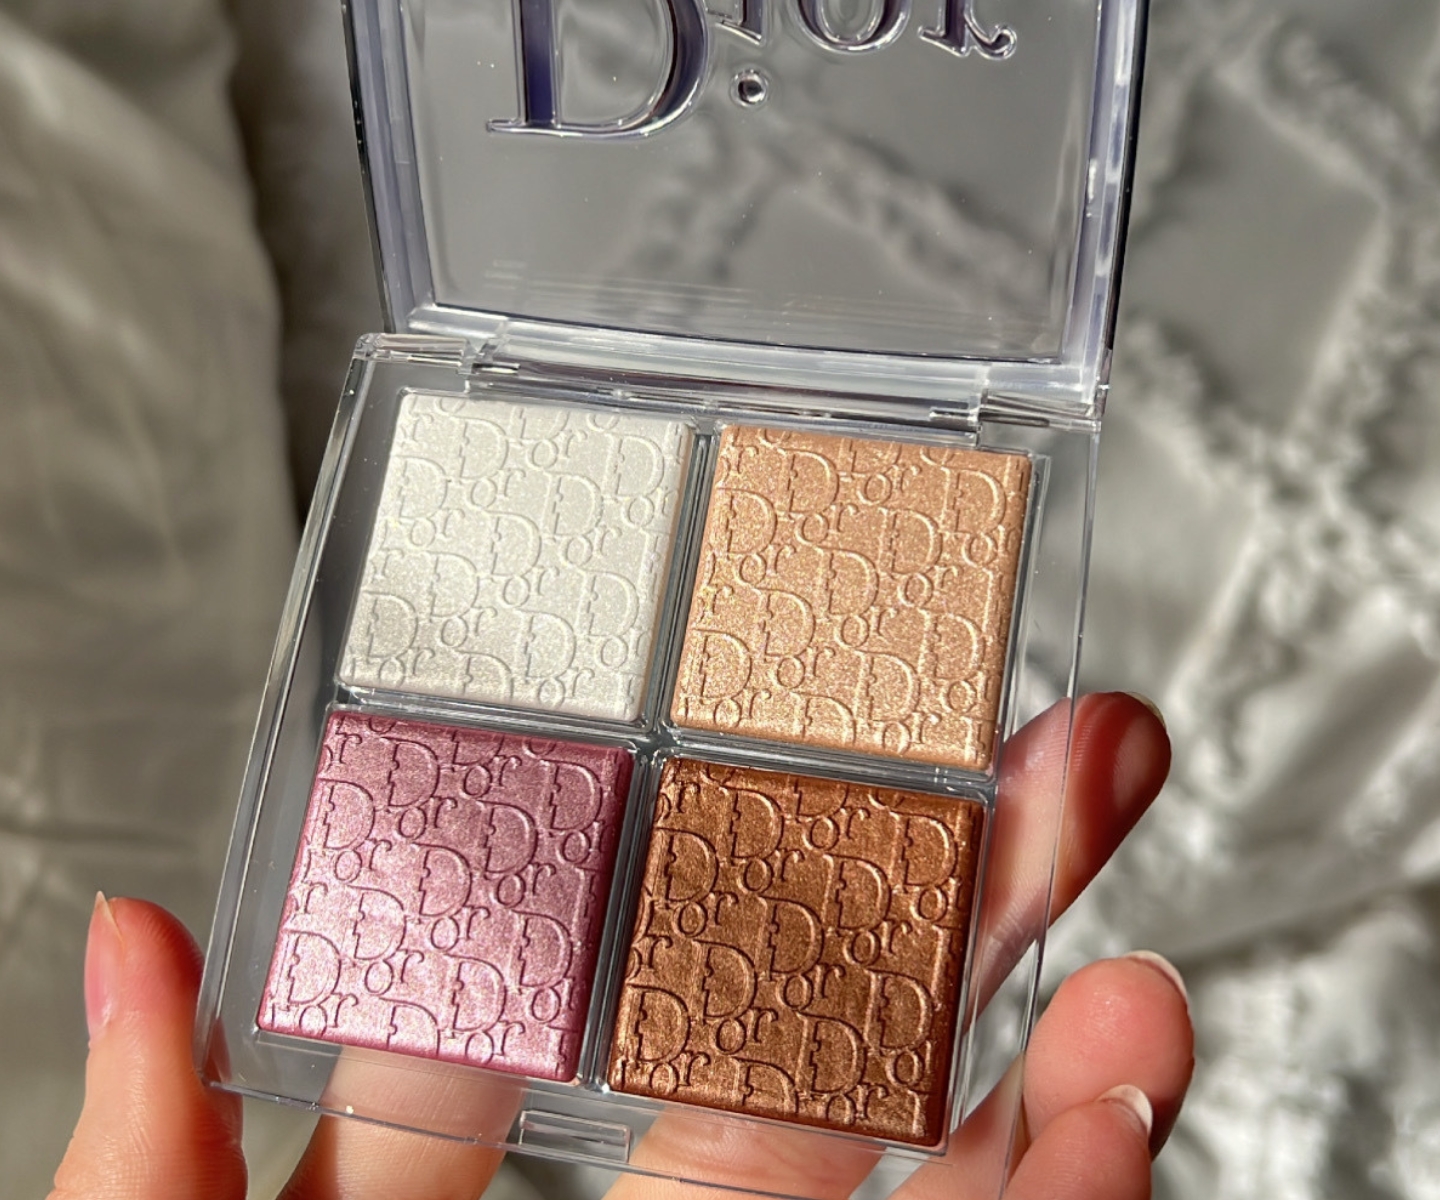 The 6 most popular Dior beauty products - Bets-selling Dior beauty